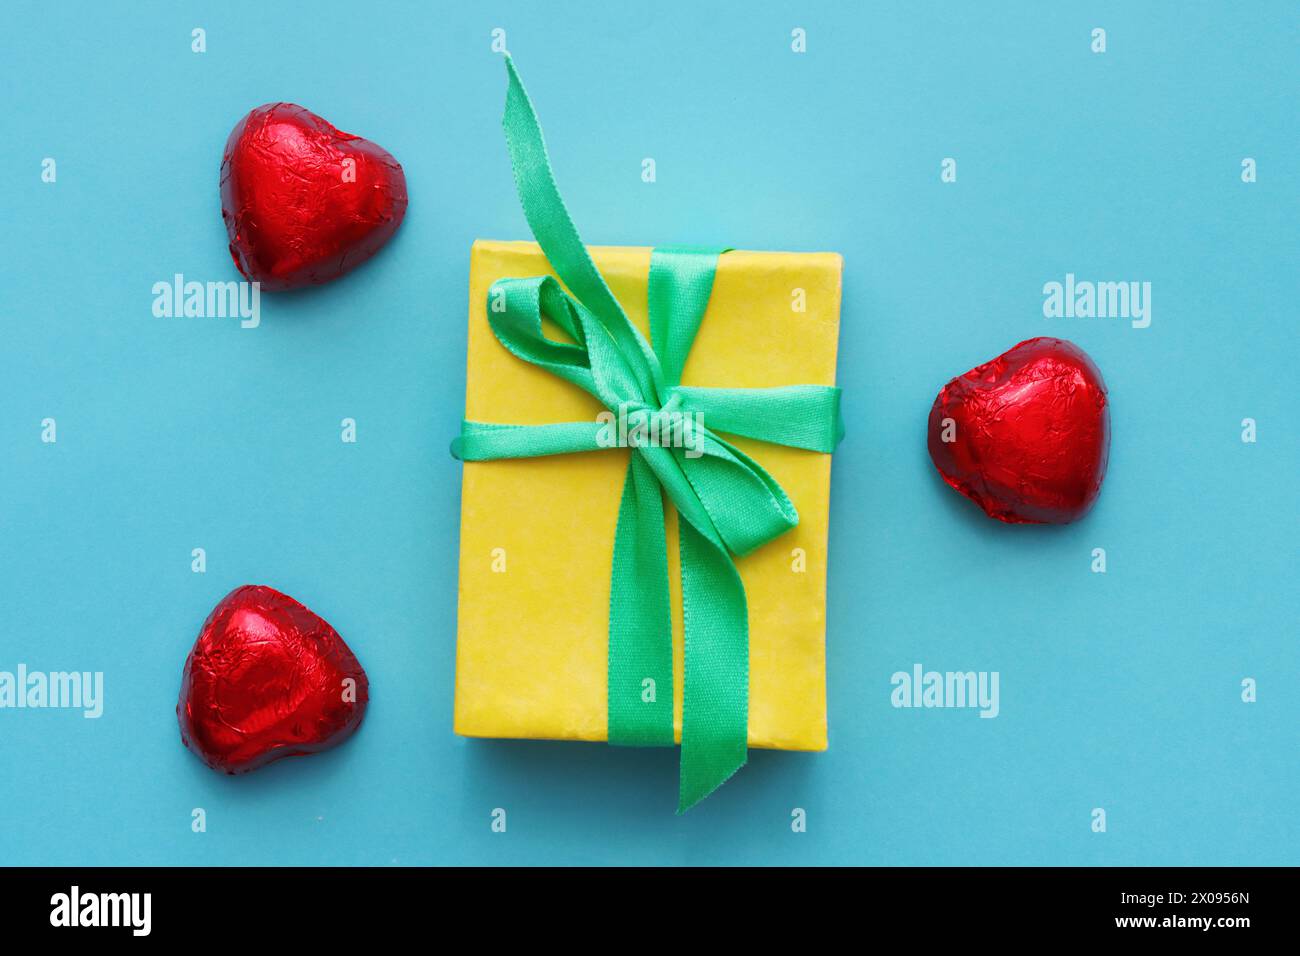 Christmas holiday concept with yellow gift box tied blue ribbon and red heart-shaped candies on a blue paper background... Stock Photo